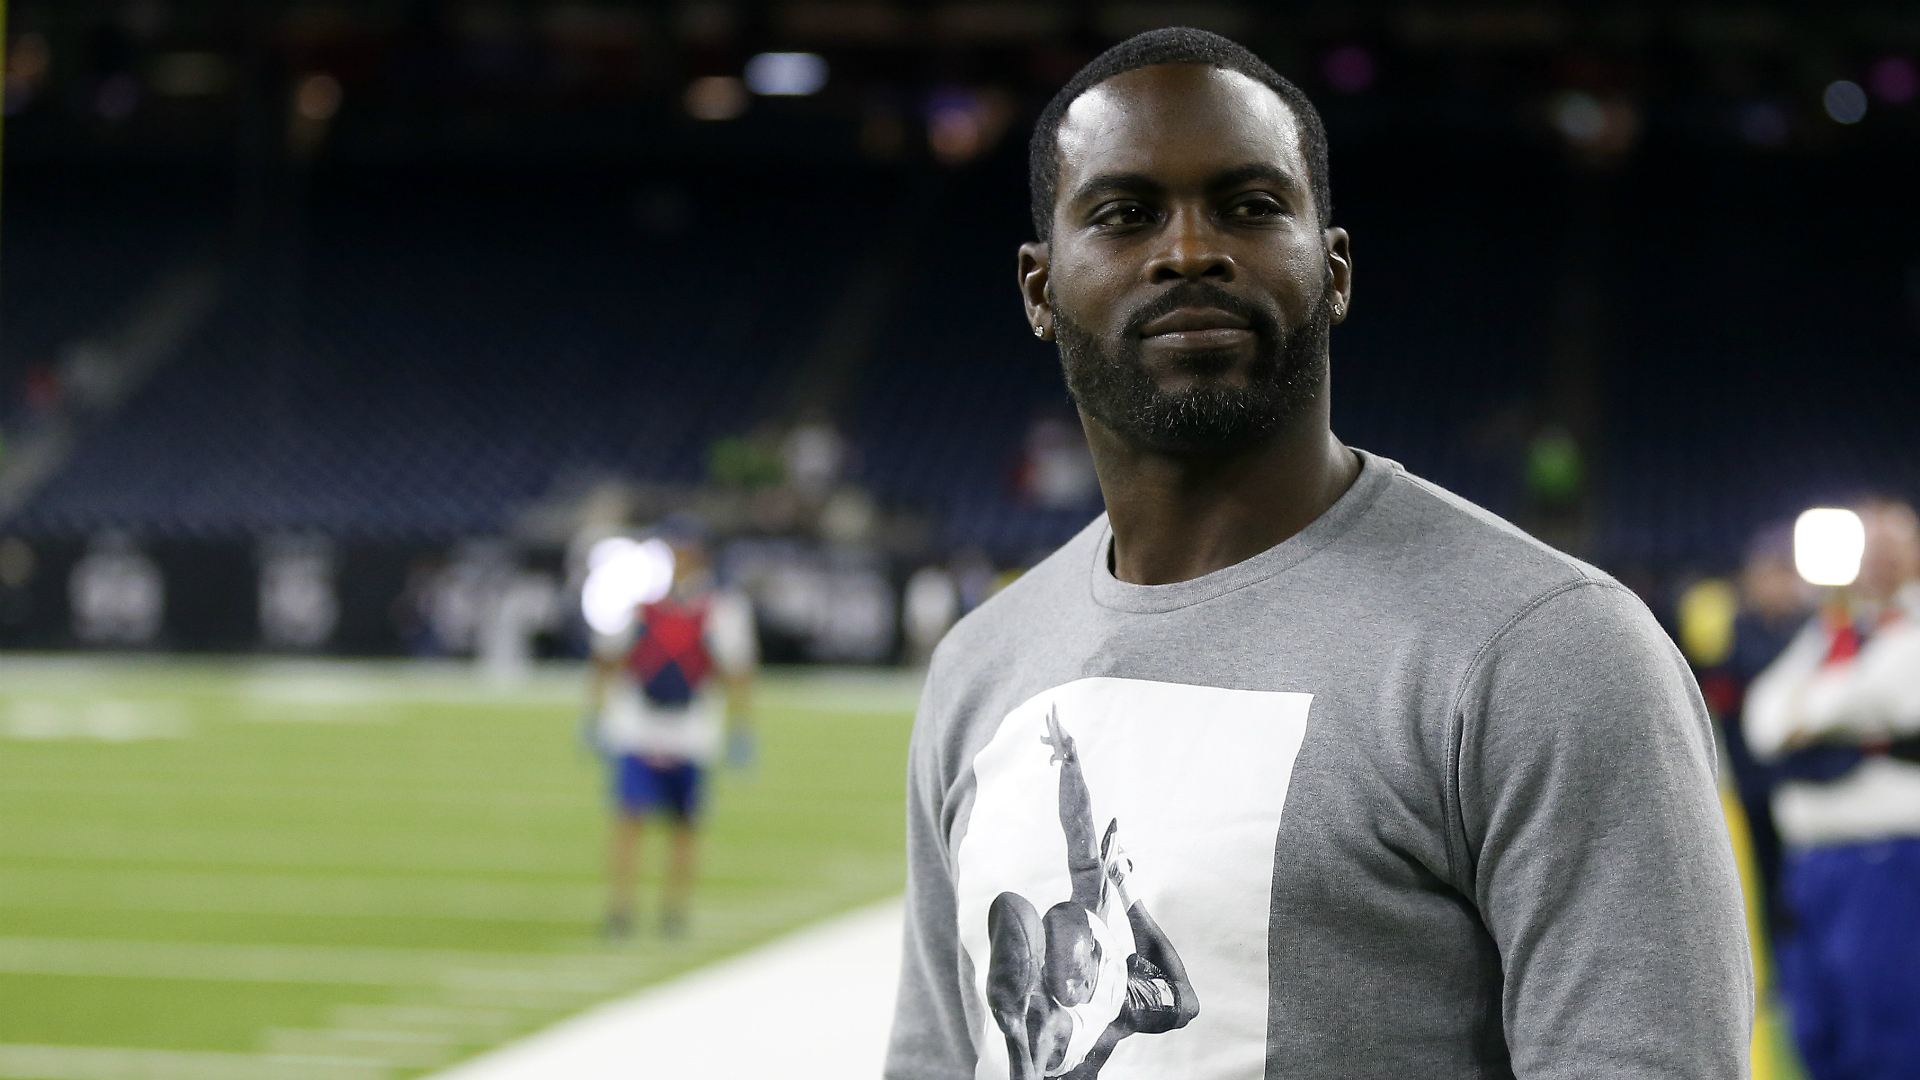 celebrities who committed crimes - That piece of sh*t dog fighter Michael Vick.